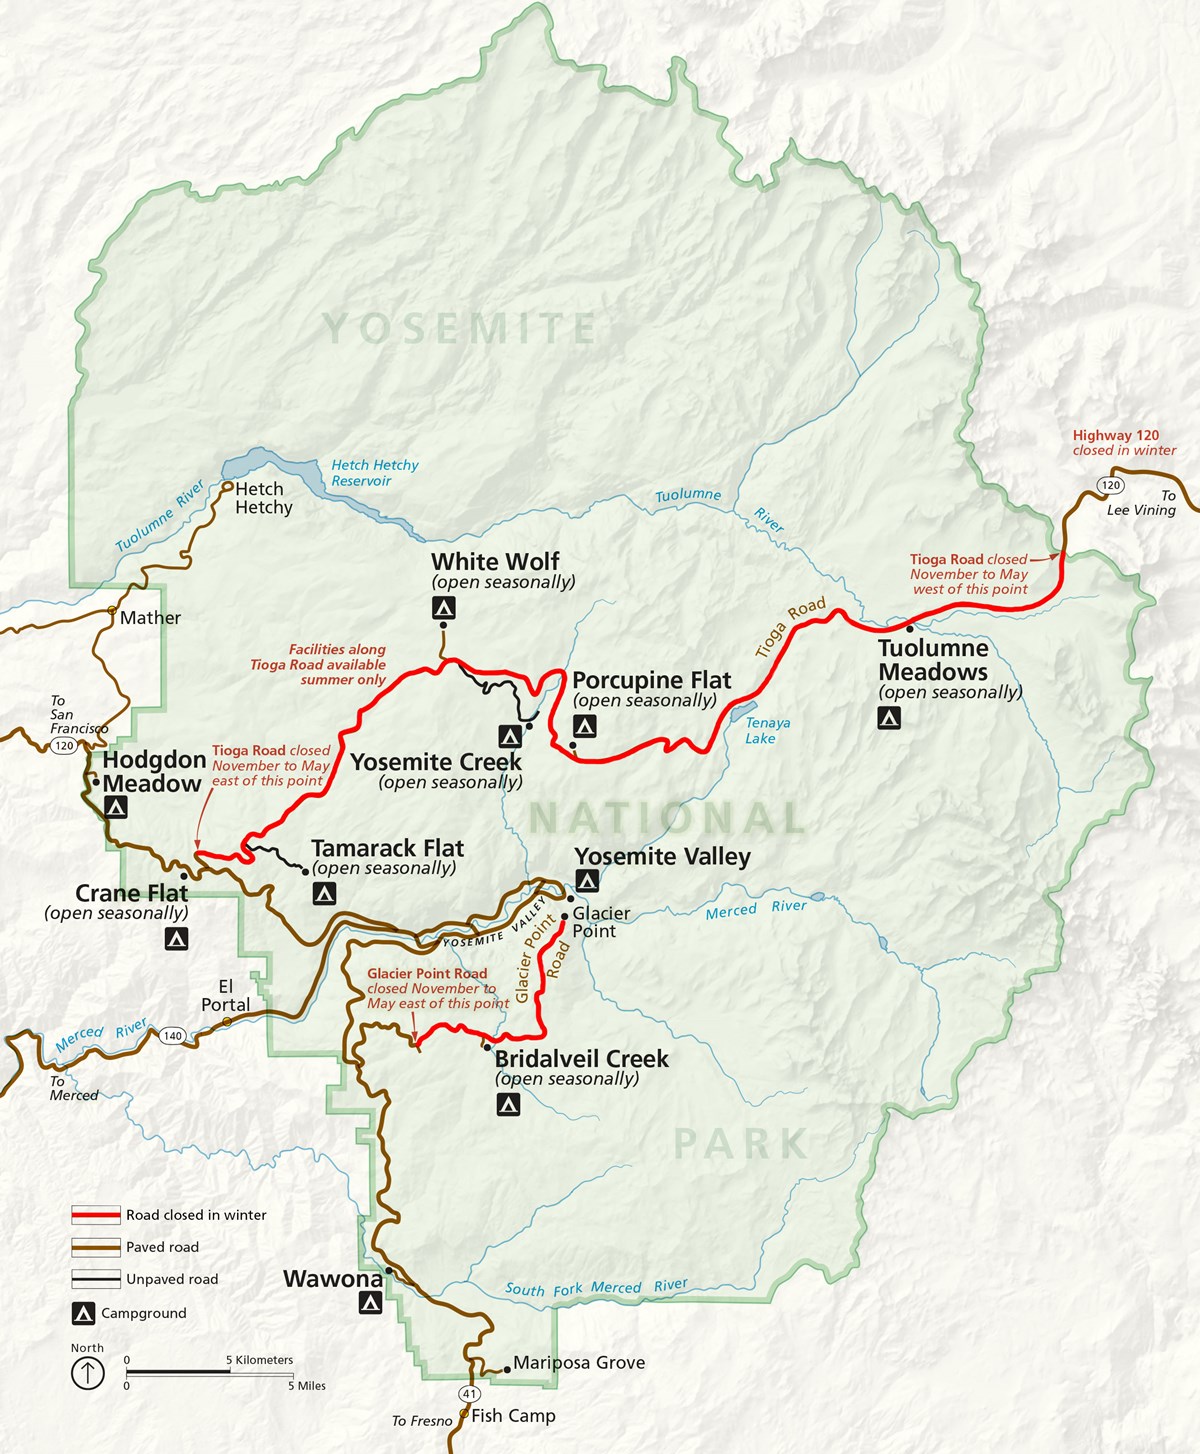 Map of the park with Glacier Point and Tioga Roads closed for winter